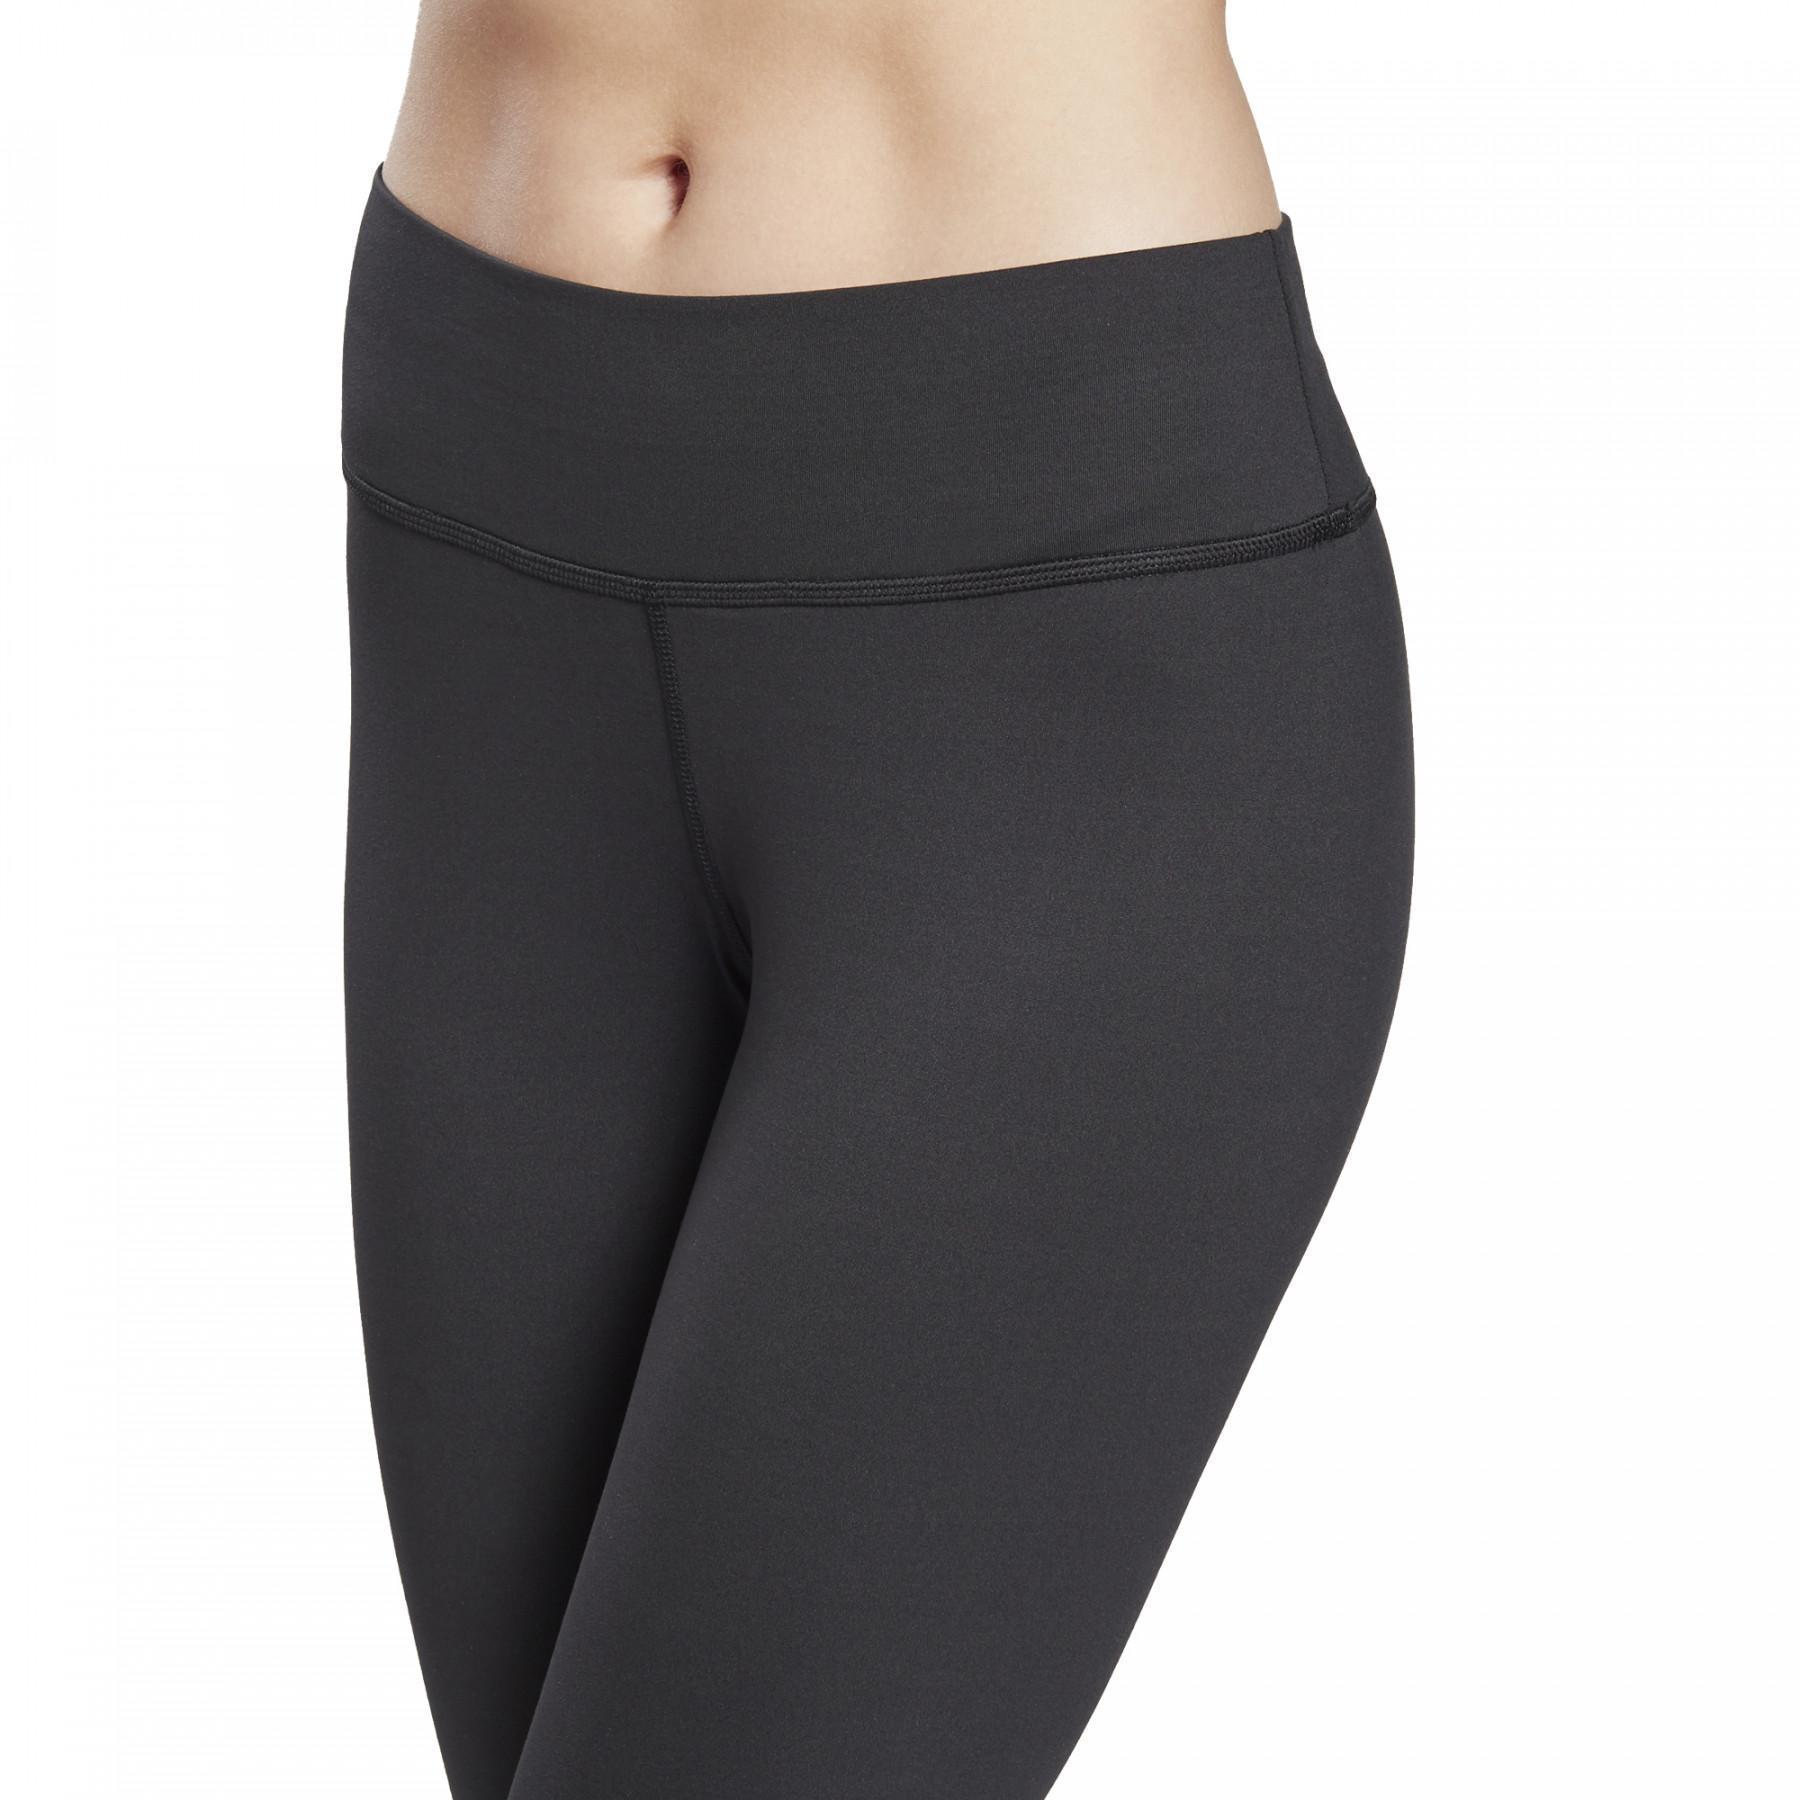 Pantalones mujer Reebok Thermowarm Touch